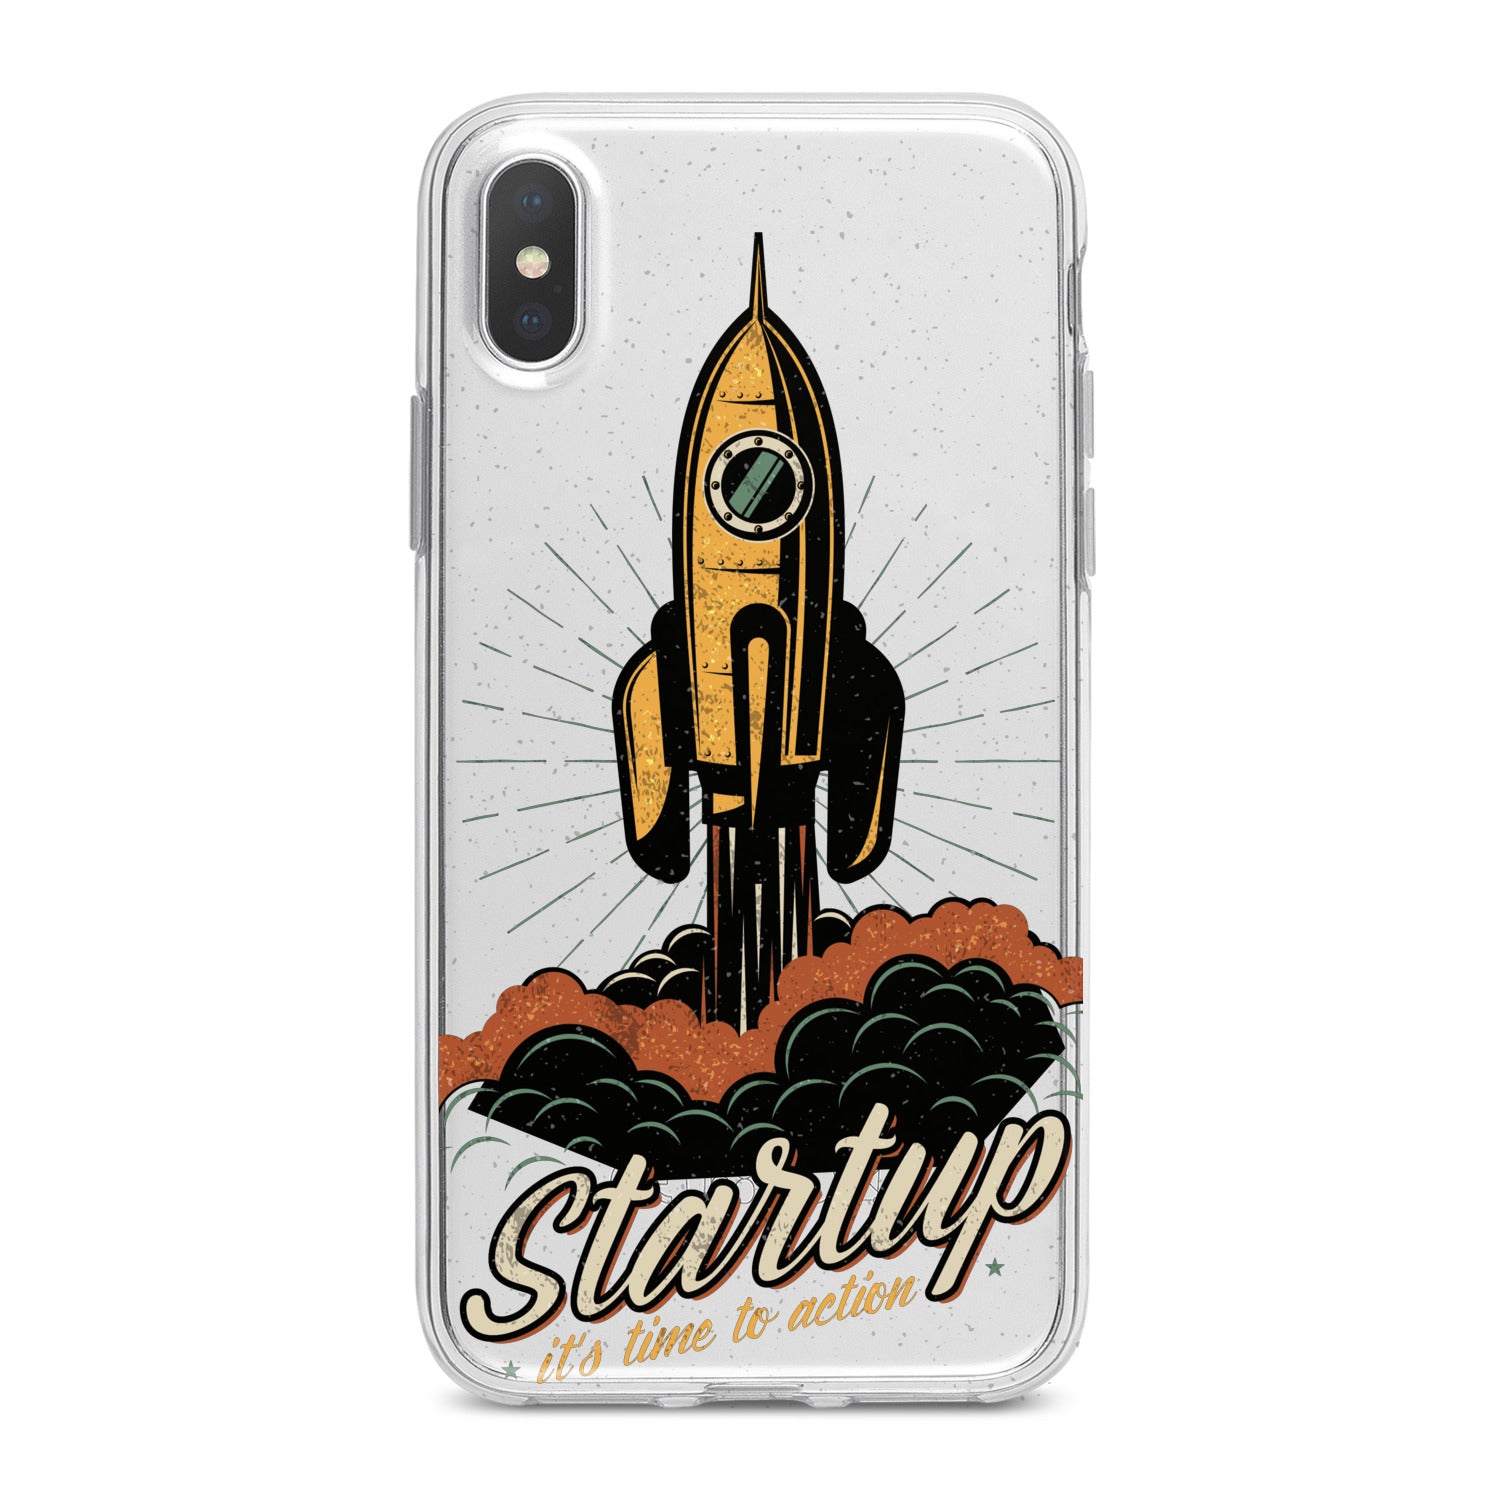 Lex Altern Yellow Rocket Phone Case for your iPhone & Android phone.